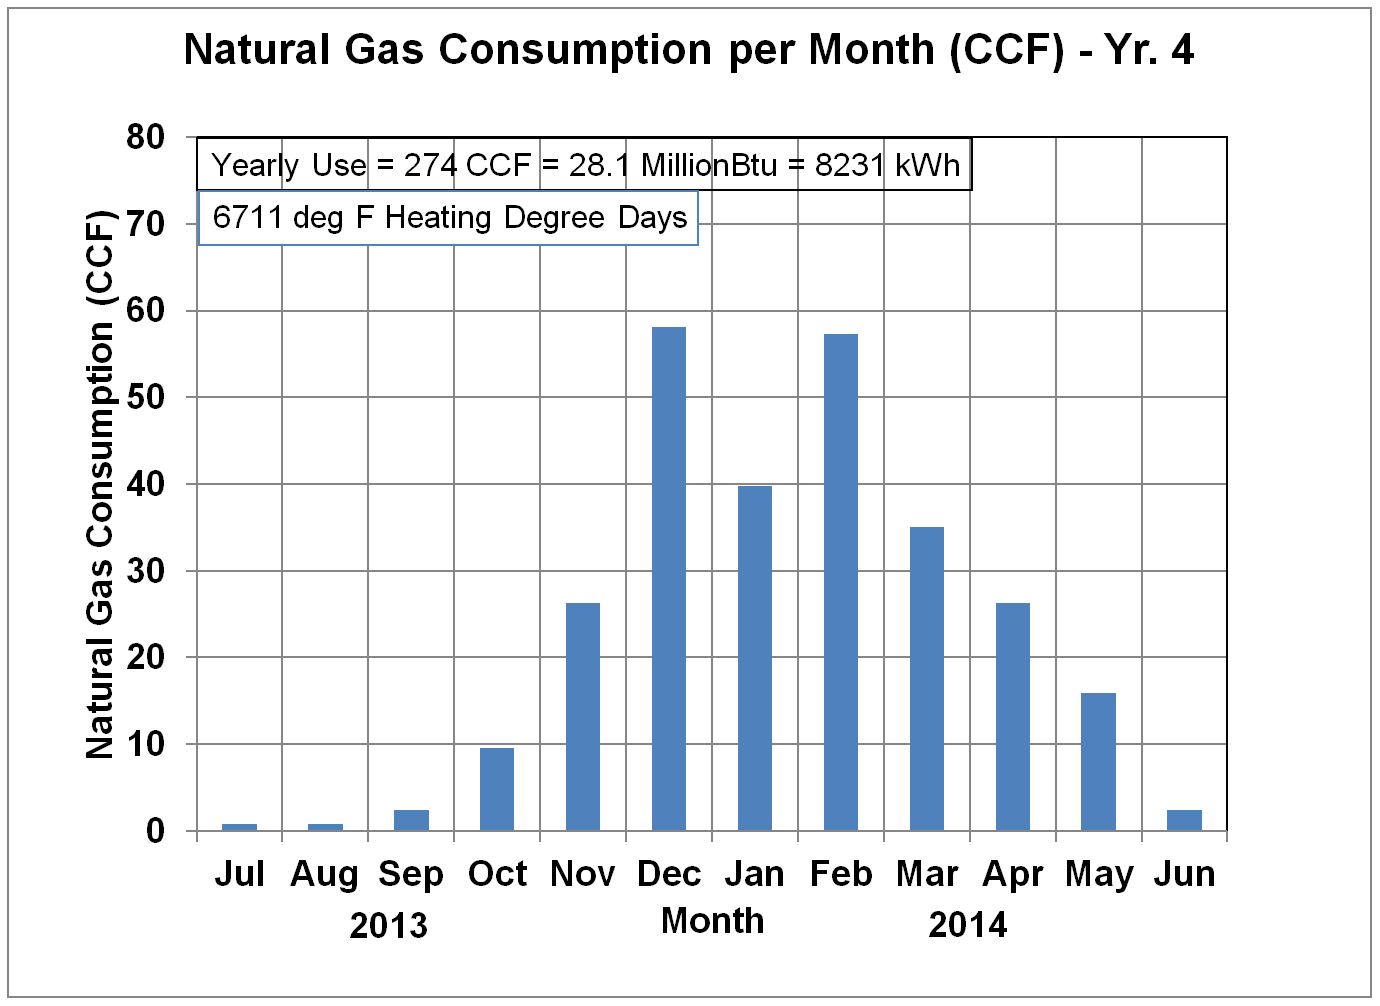 Natural Gas Usage in CCF - Yr. 4